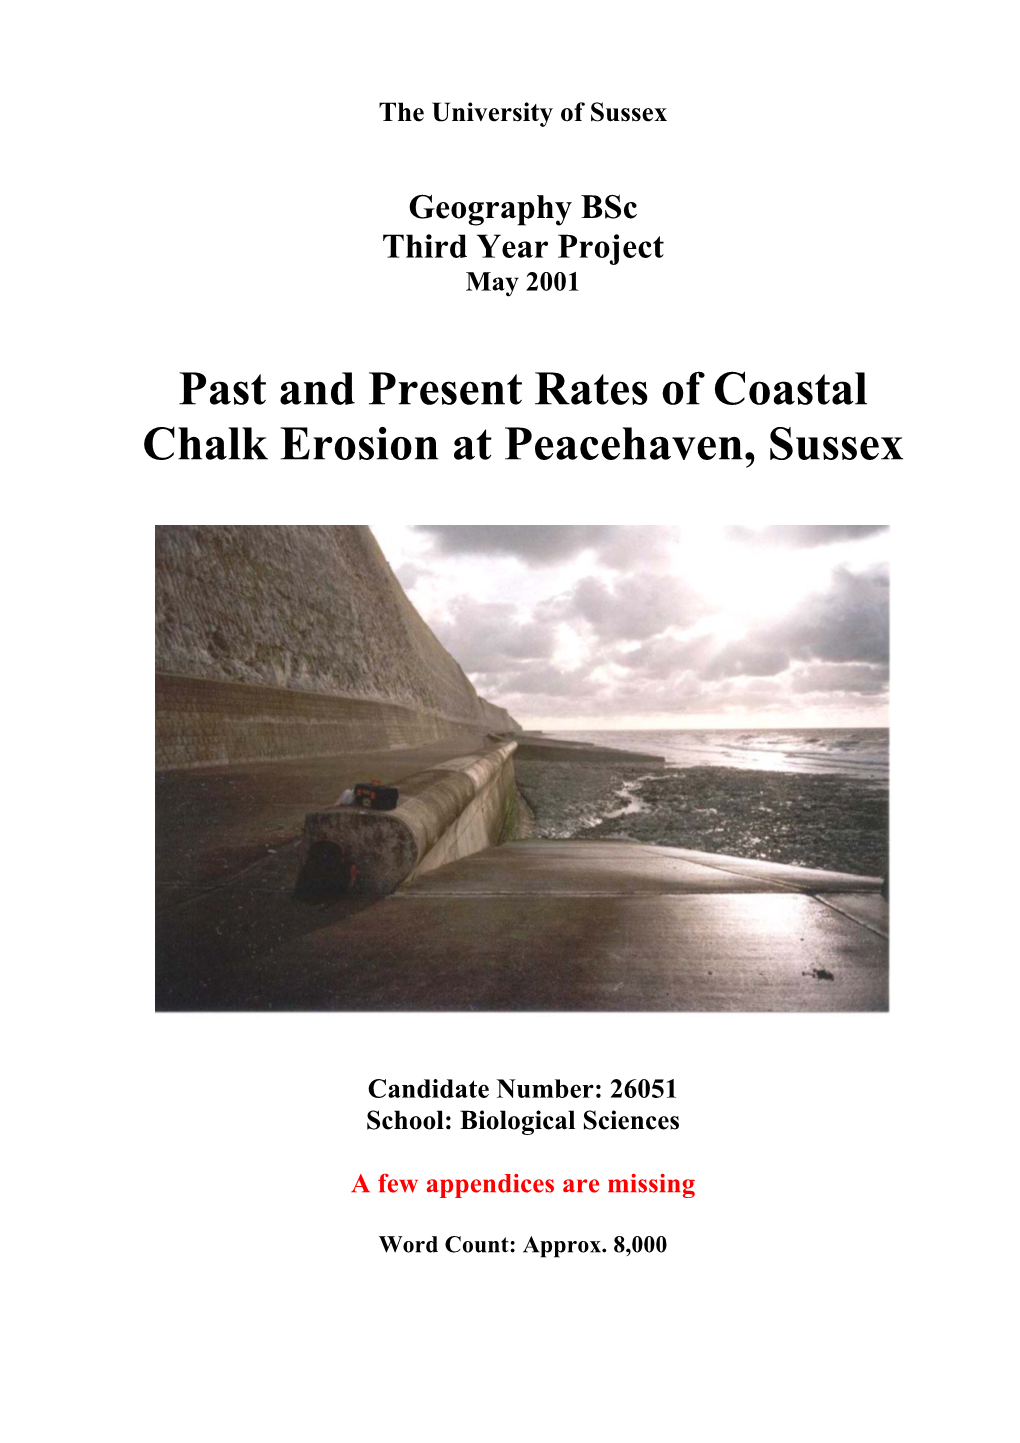 Past and Present Rates of Coastal Chalk Erosion at Peacehaven, Sussex